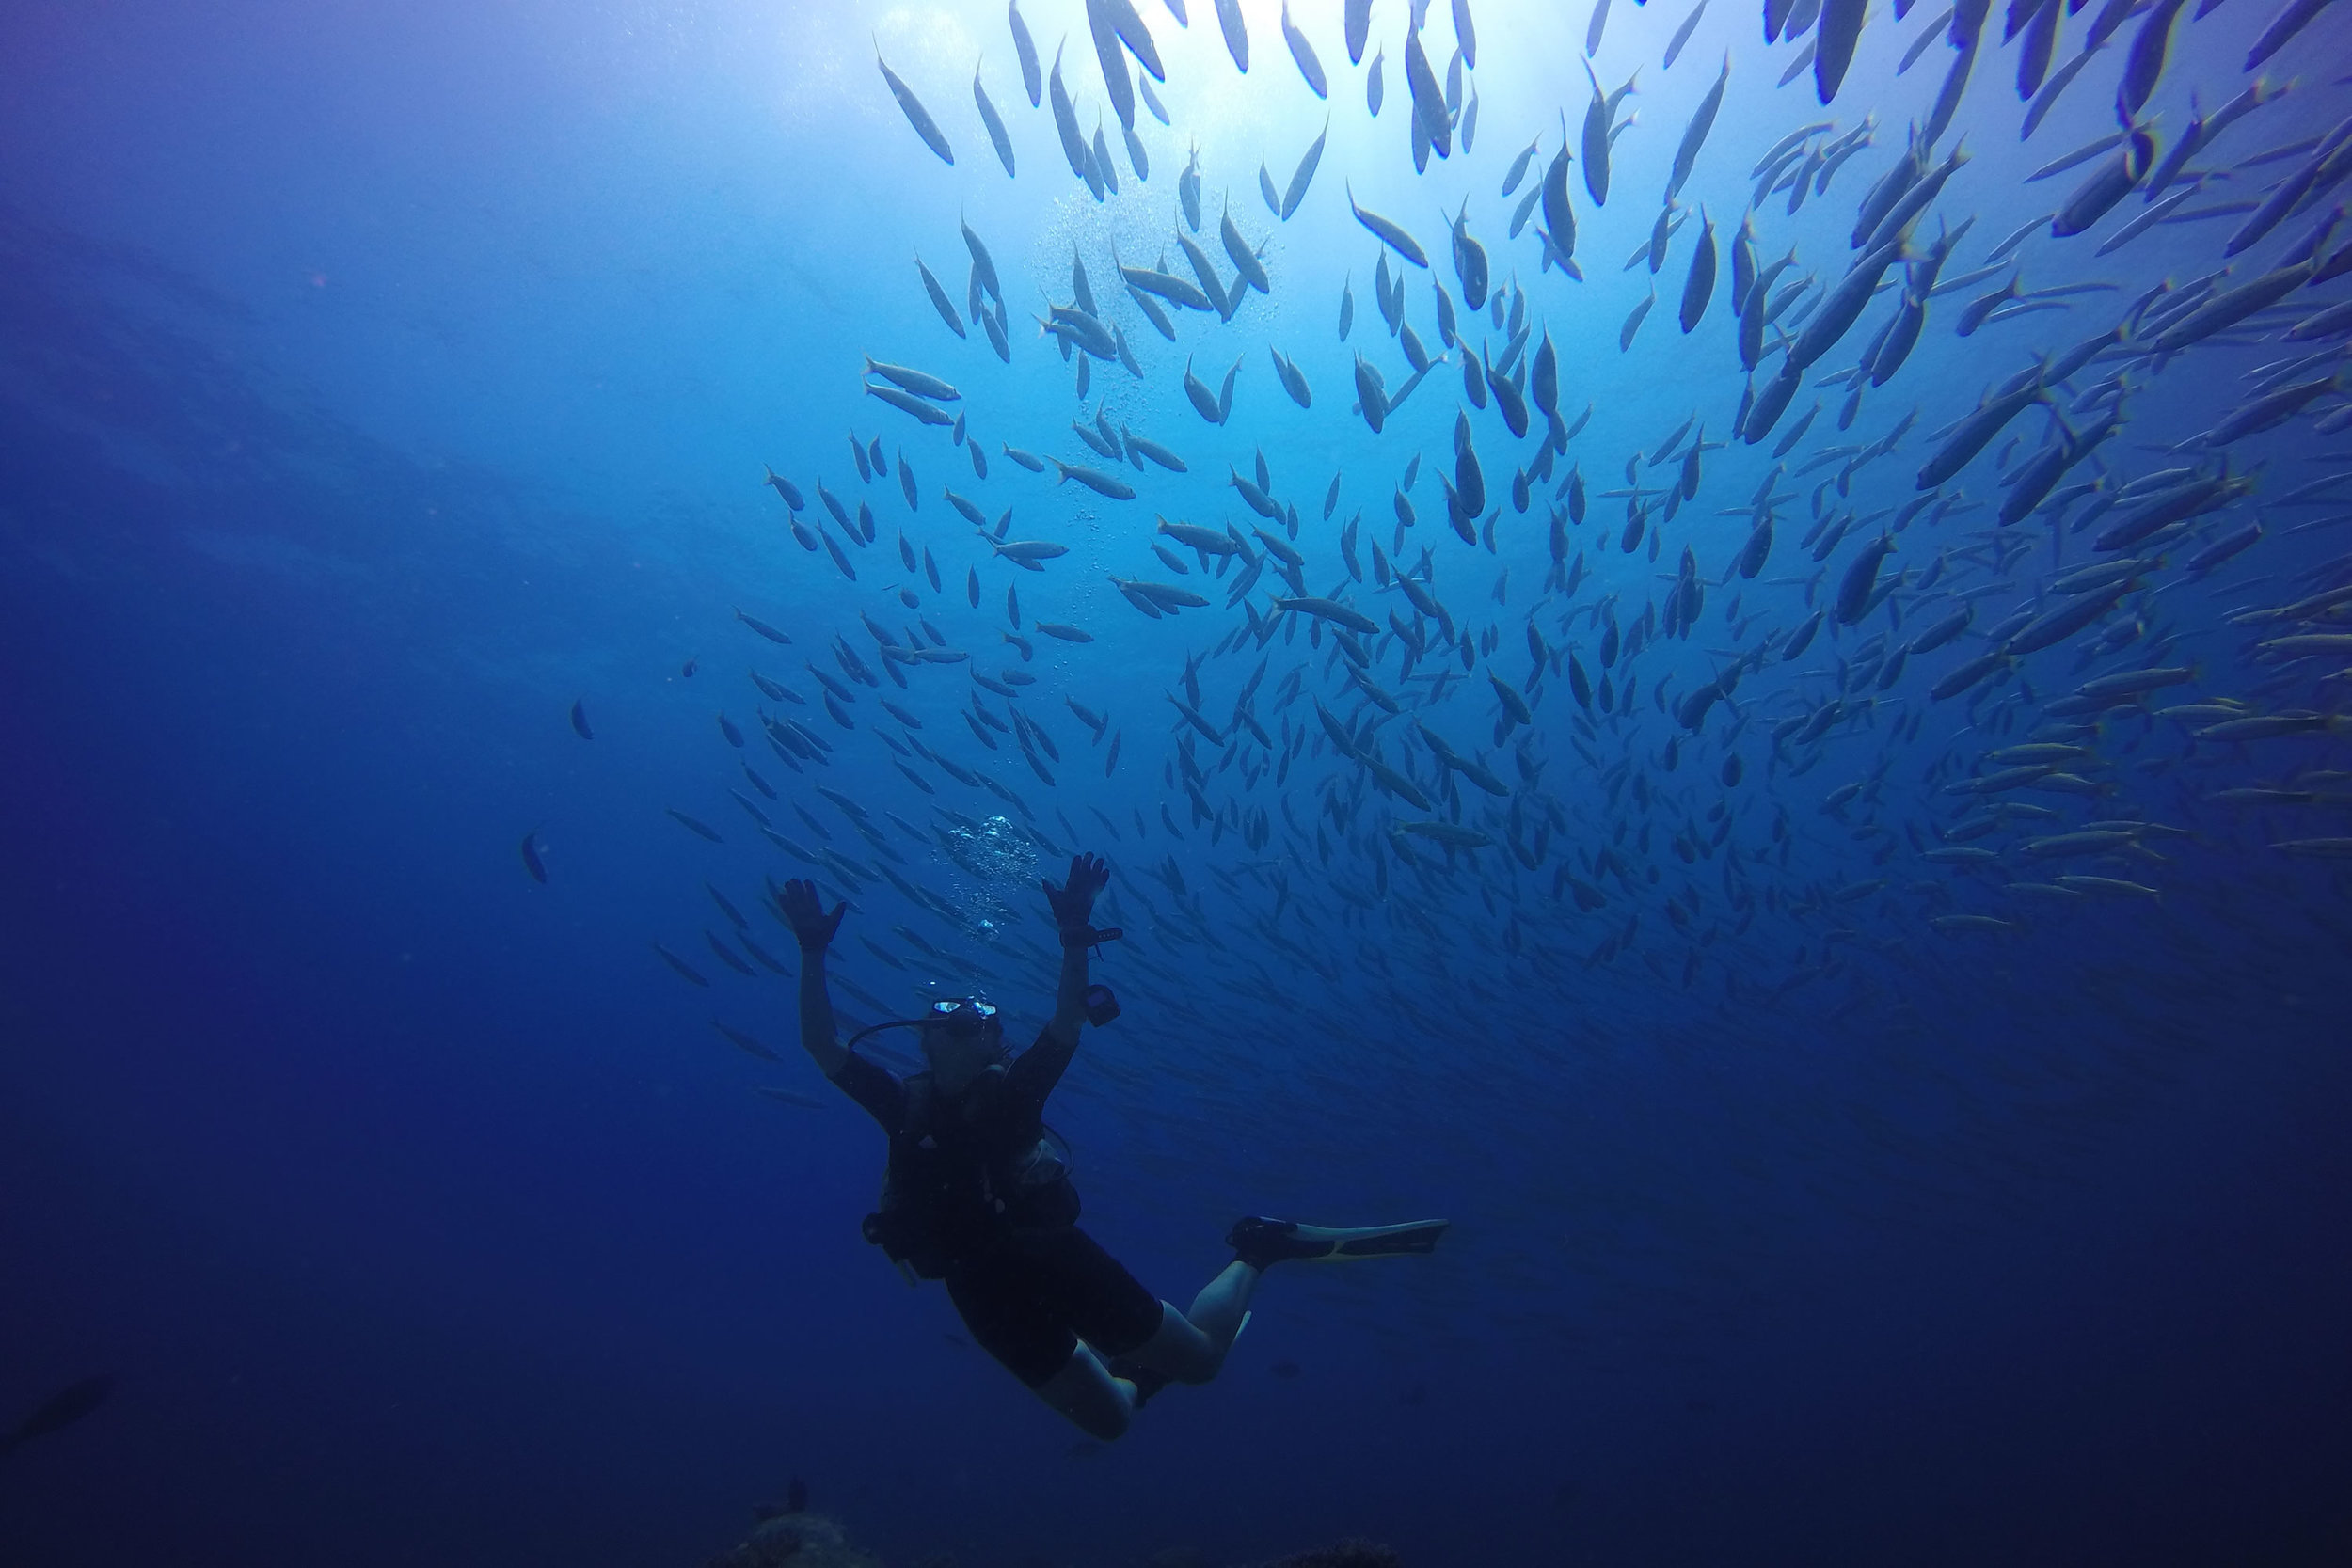 Diving in a school of fish